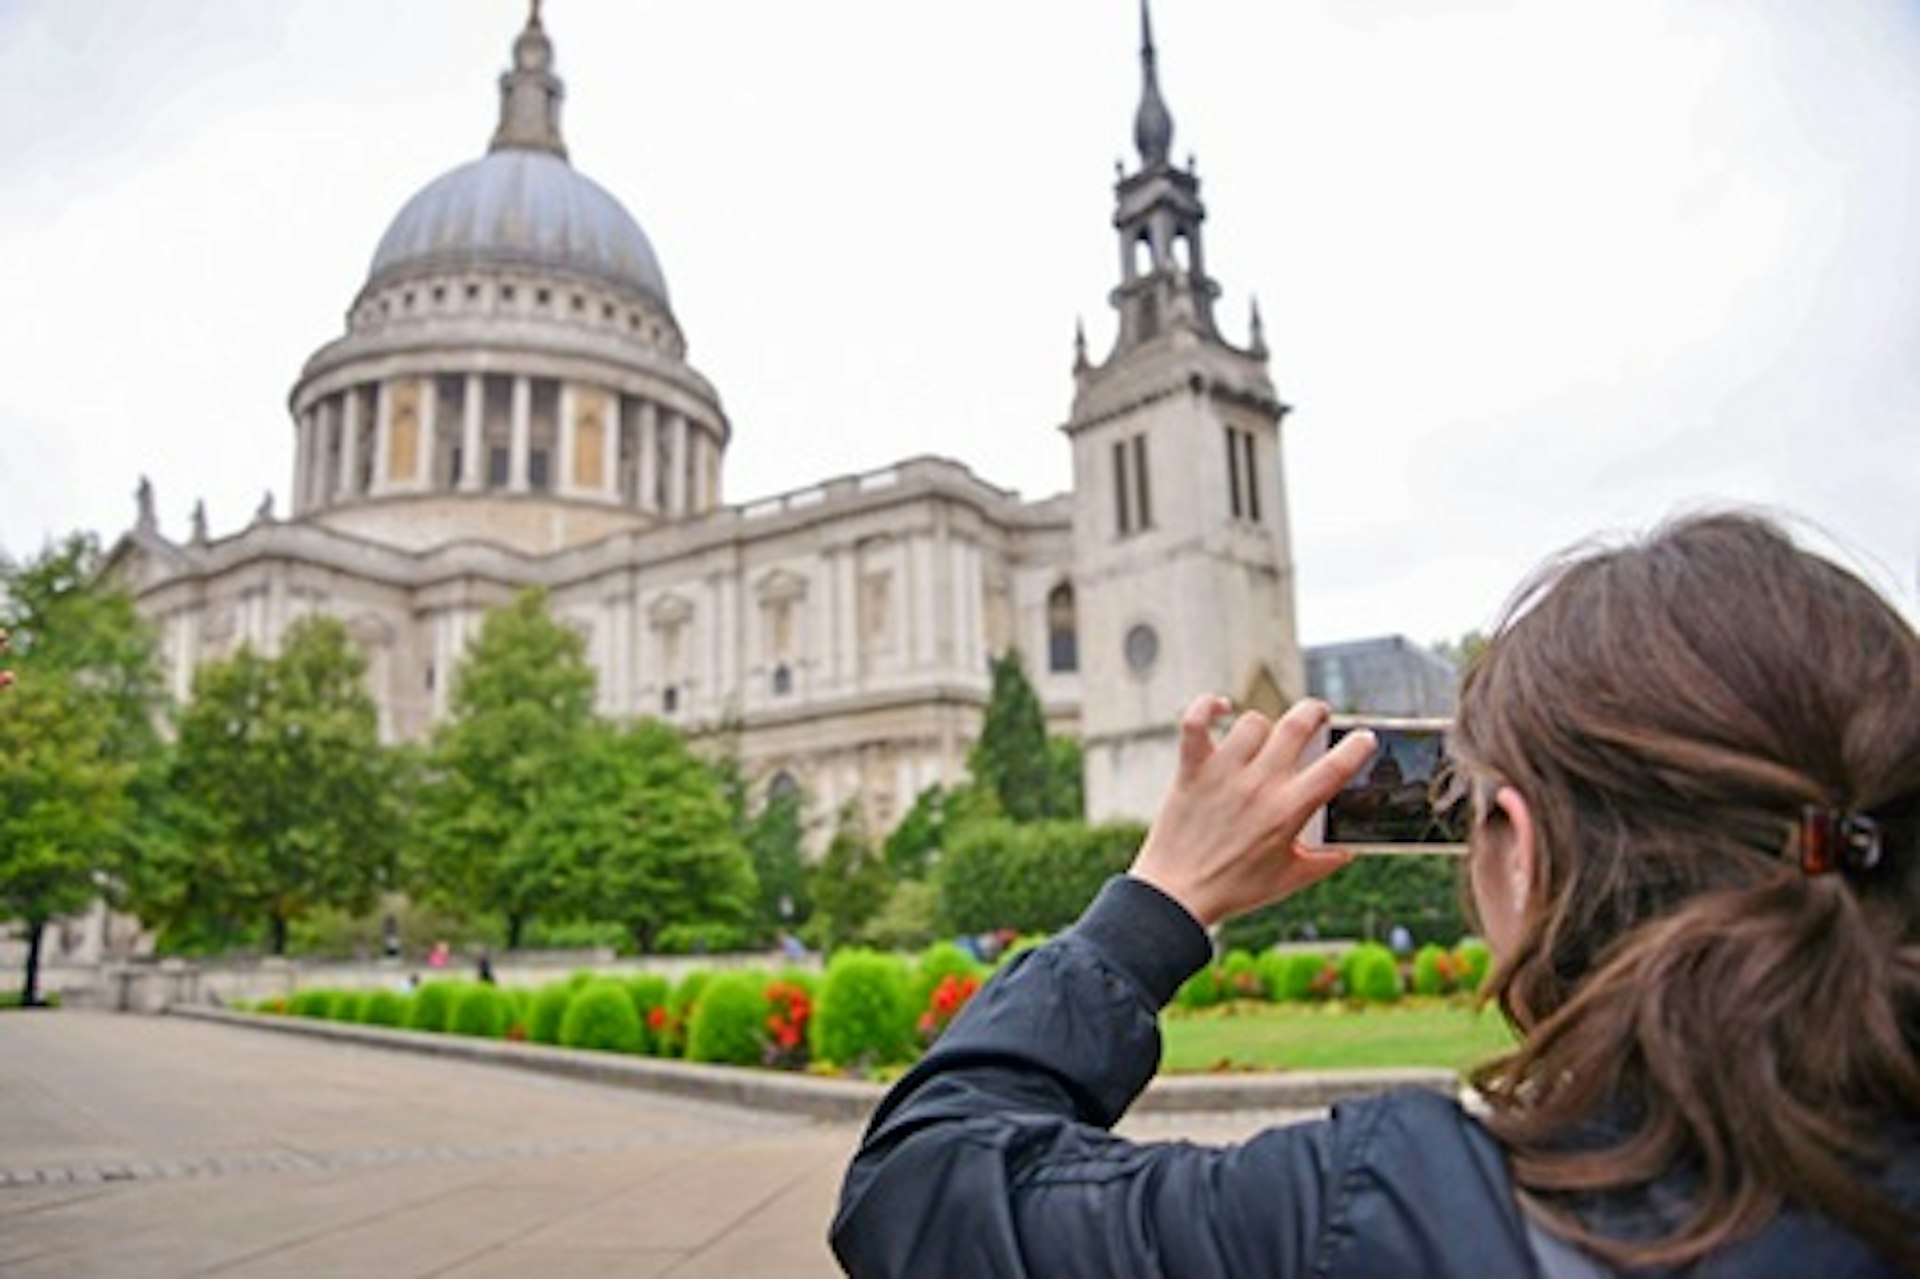 Photography Course and Tour of London's Iconic Landmarks 4